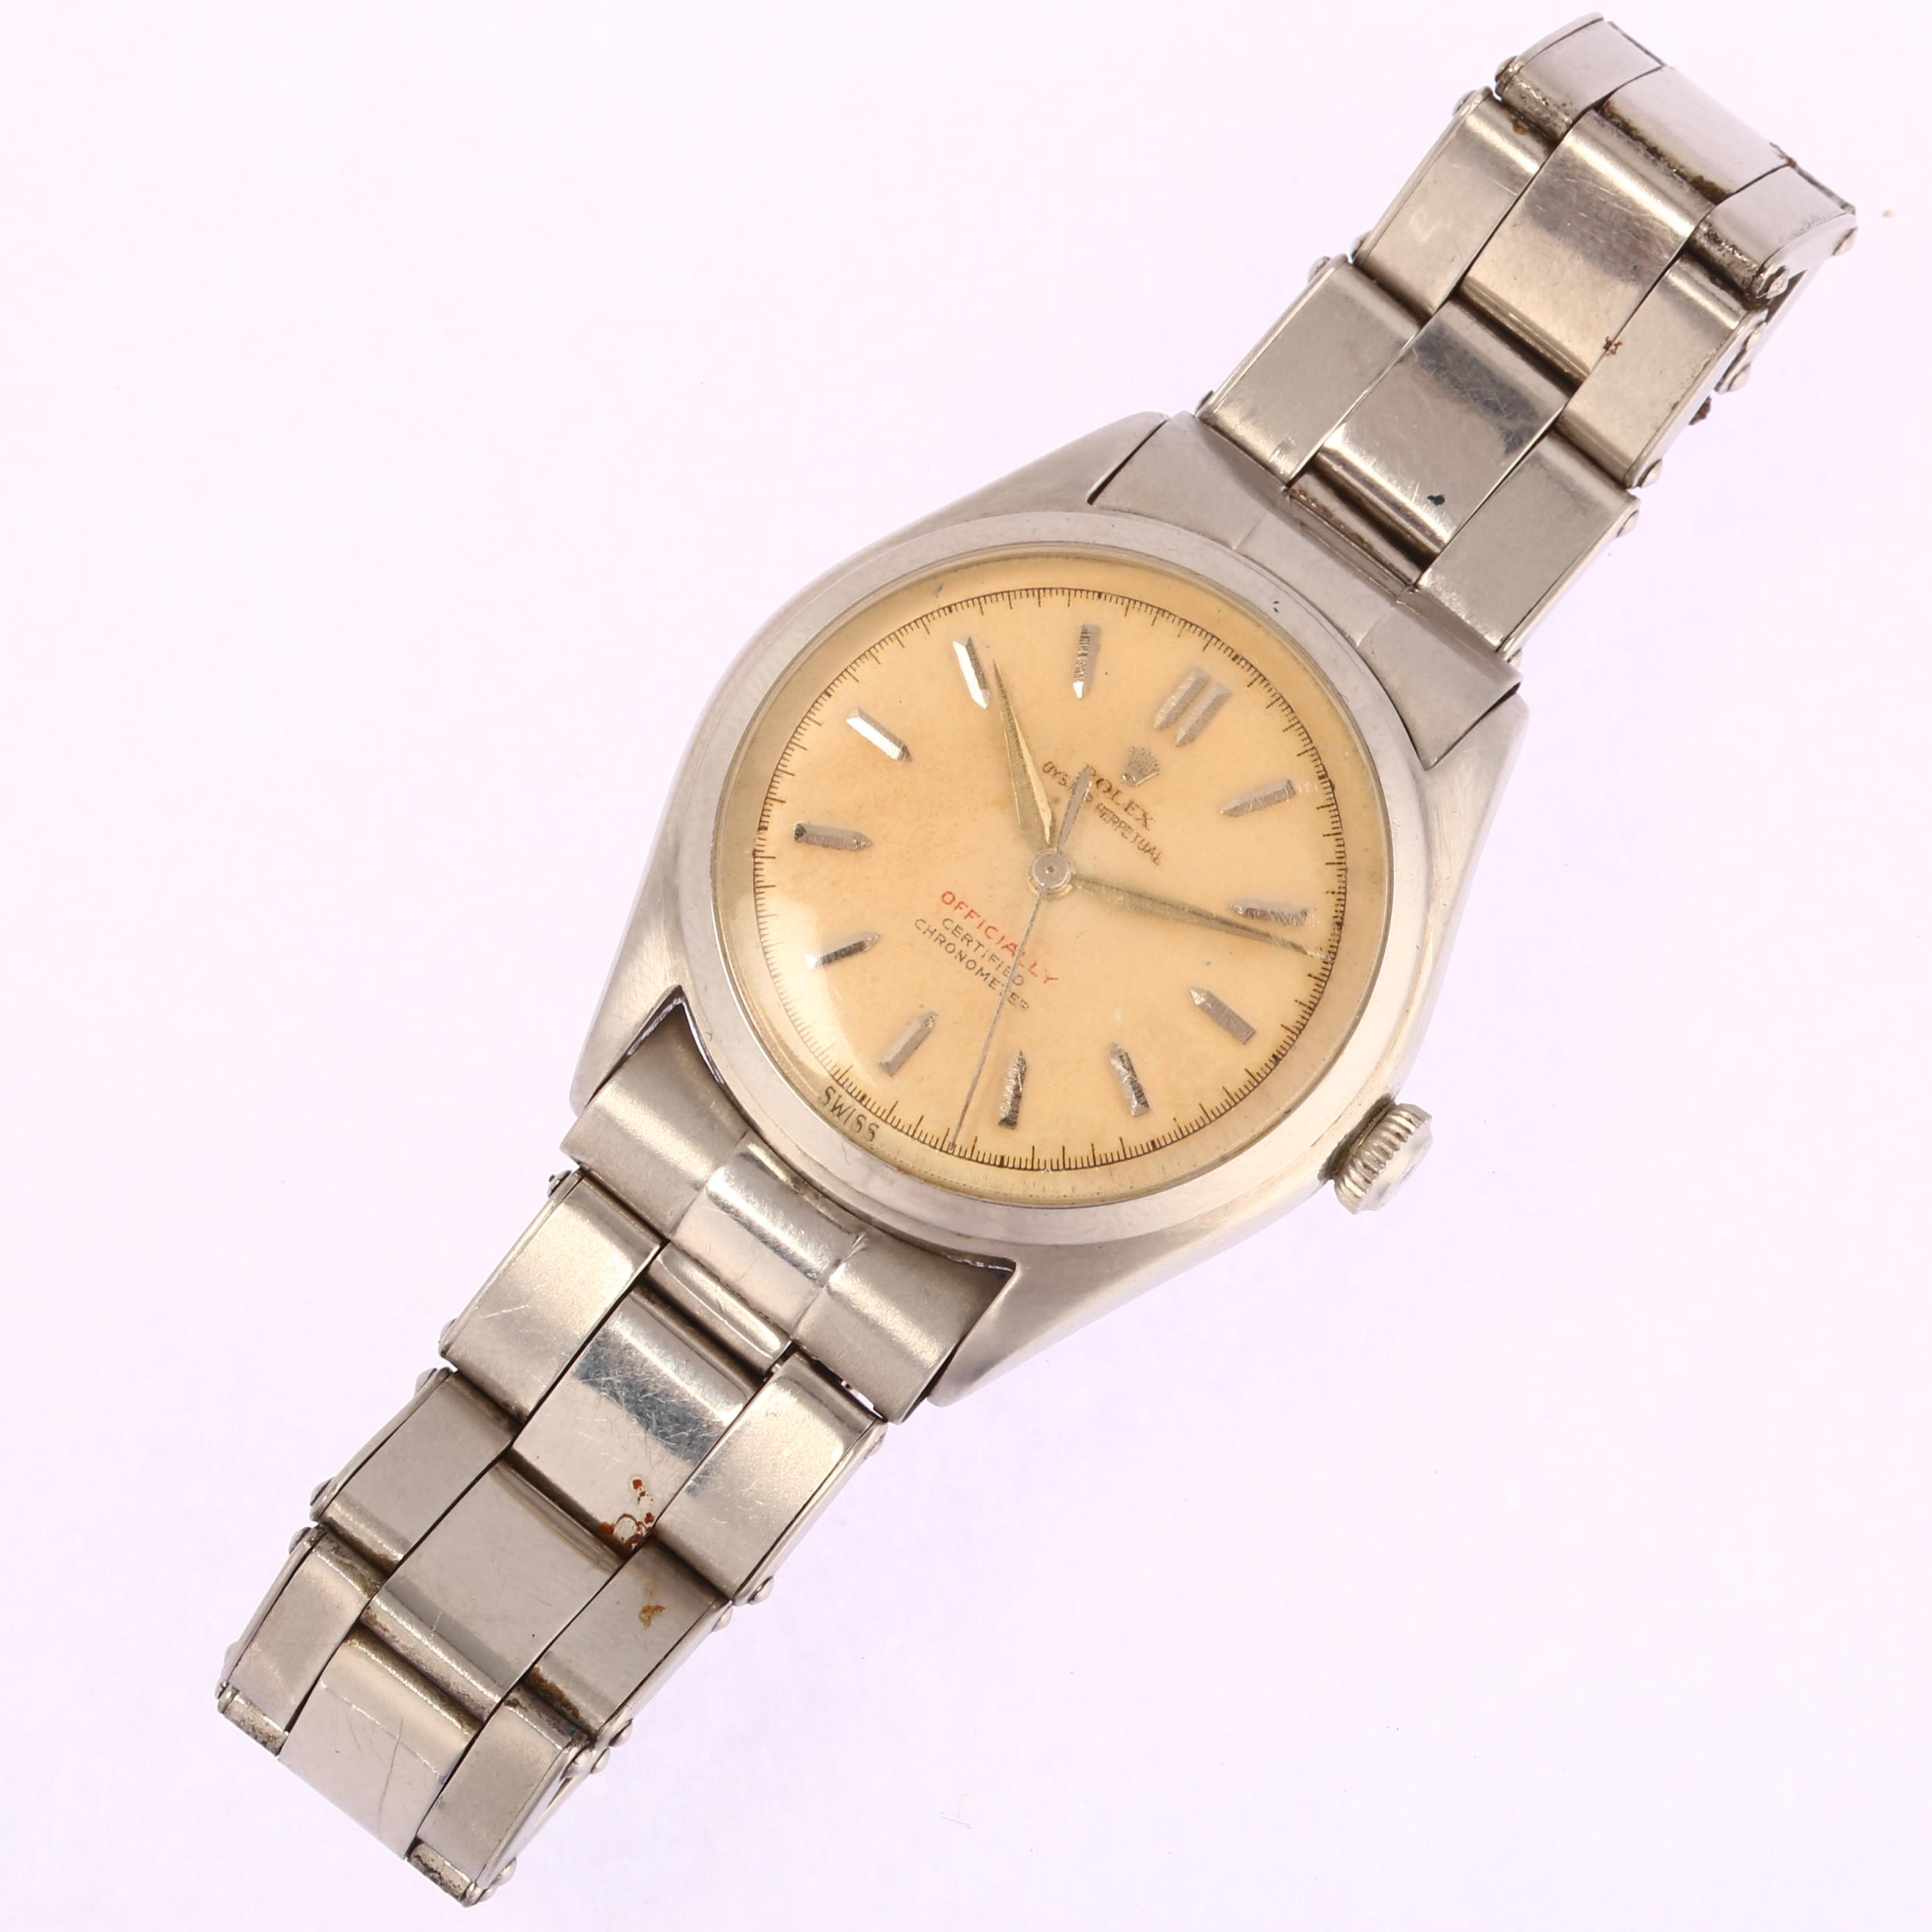 ROLEX - a stainless steel Oyster Perpetual 'Bubble-Back' automatic bracelet watch, ref. 6106, - Image 2 of 5